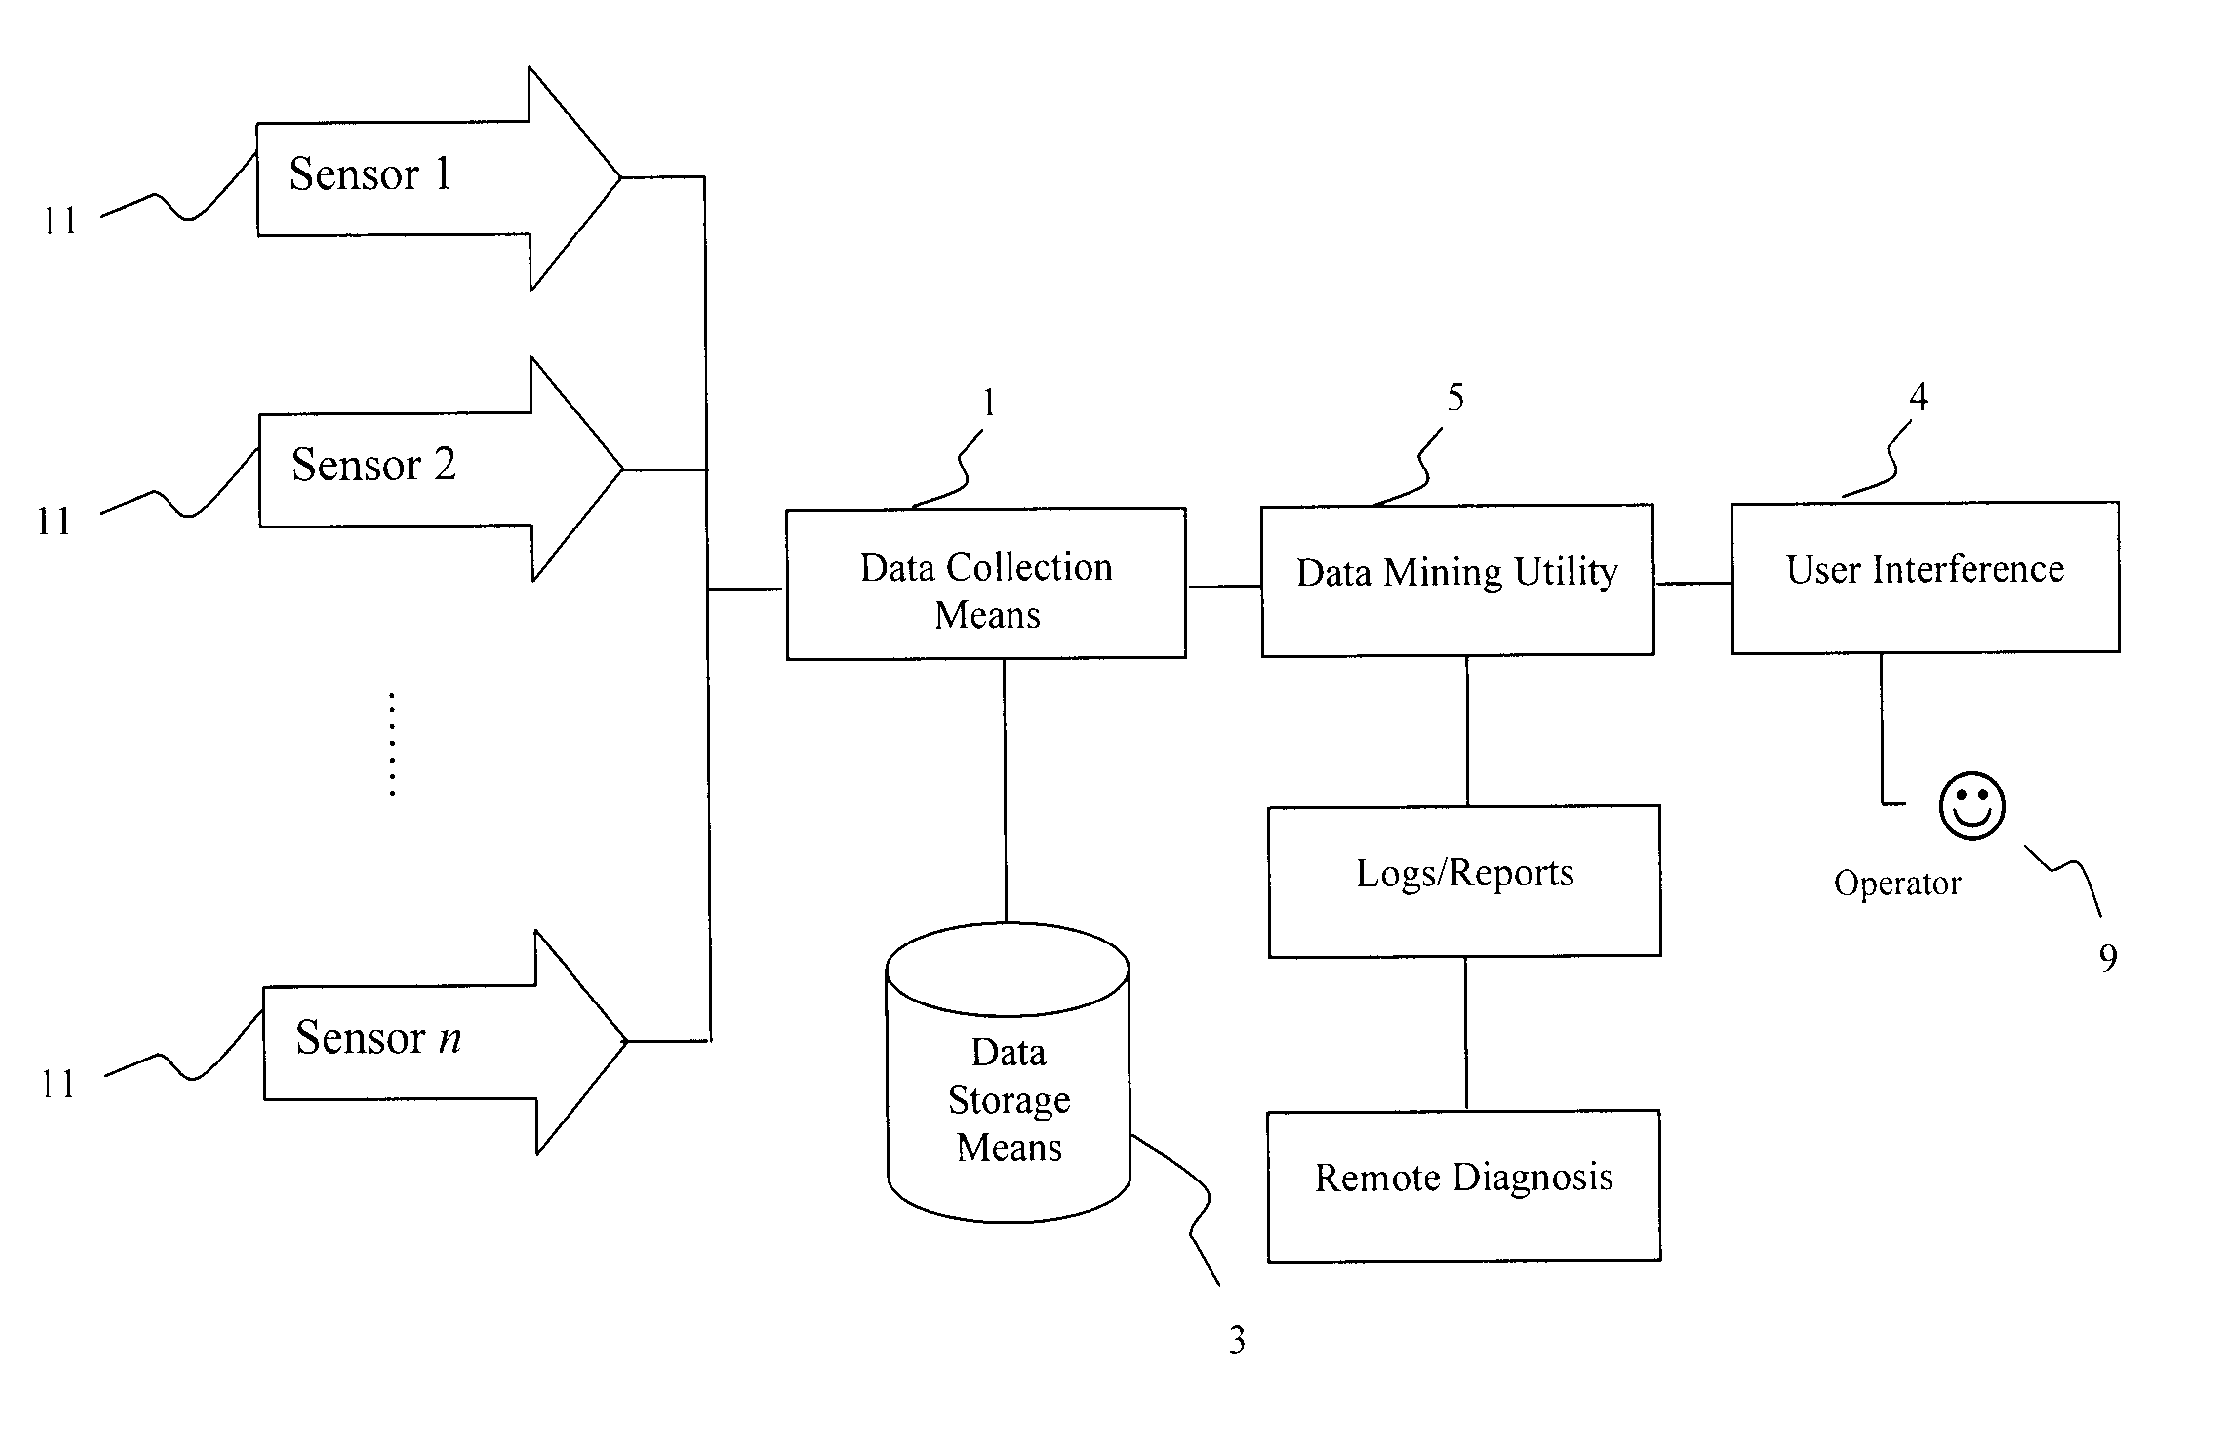 System,  Method and Computer Program for Pattern Based Intelligent Control, Monitoring and Automation